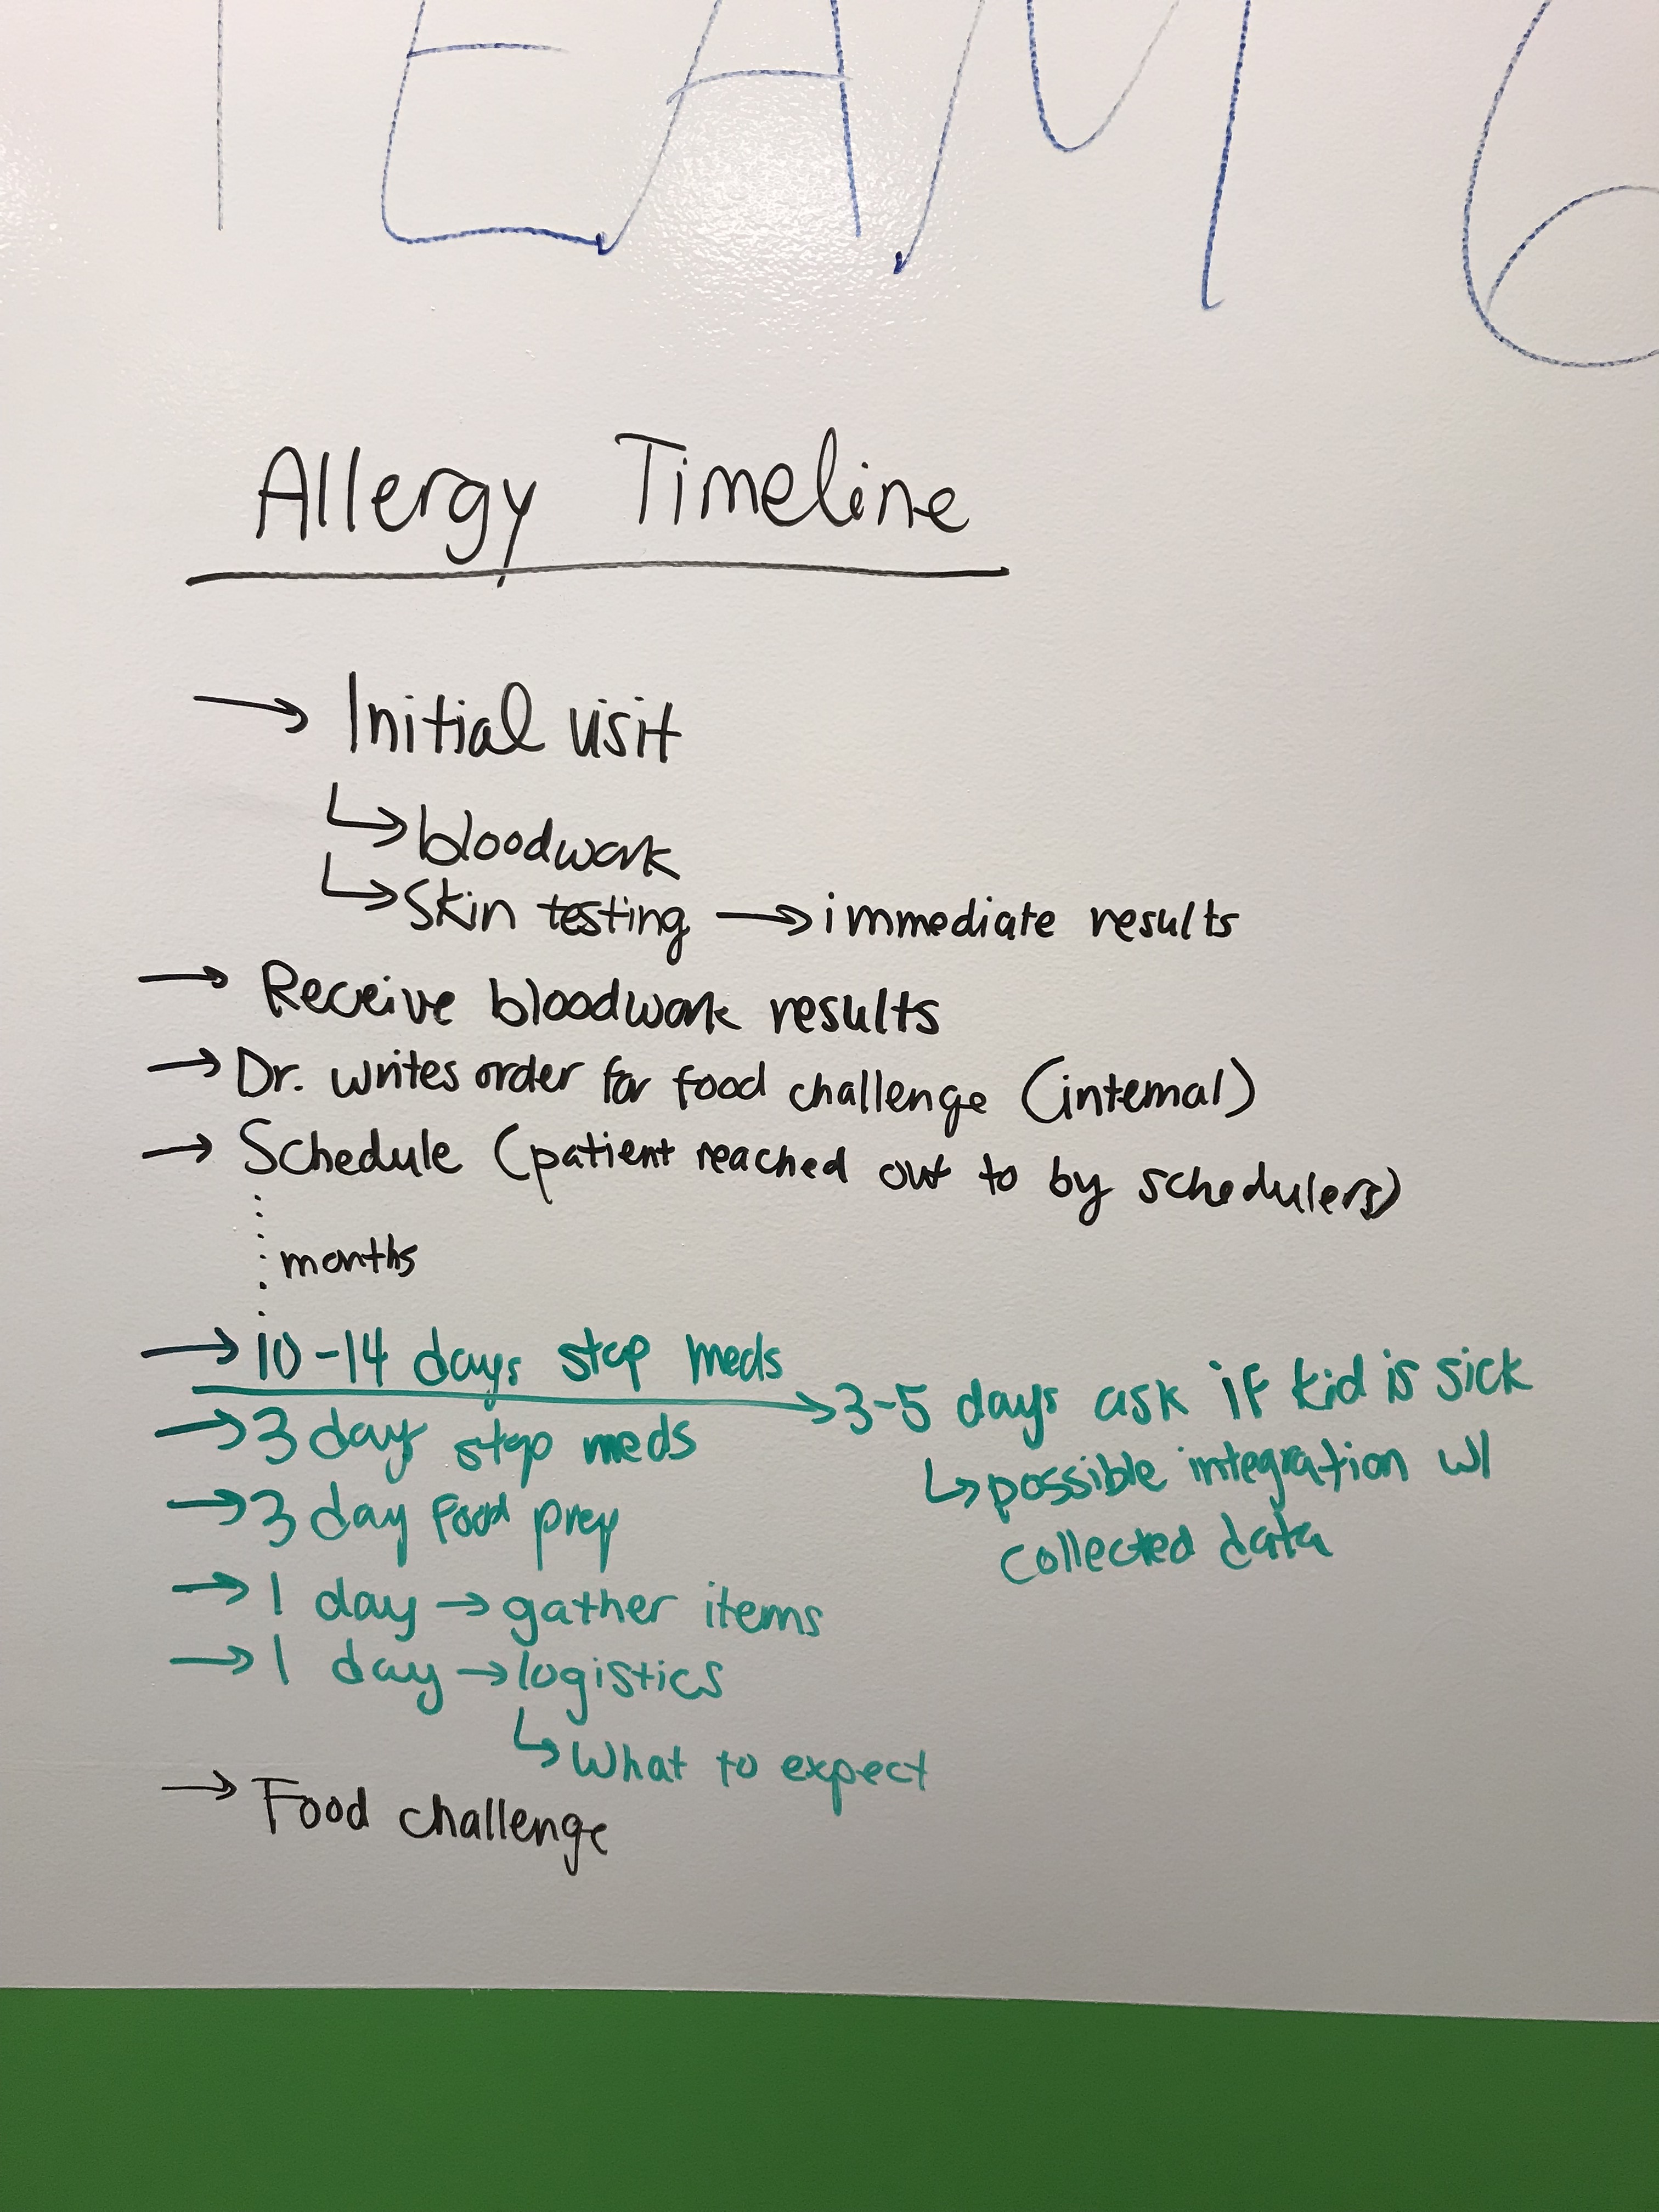 Whiteboard showing a timeline of a child and family preparing for an allergy visit